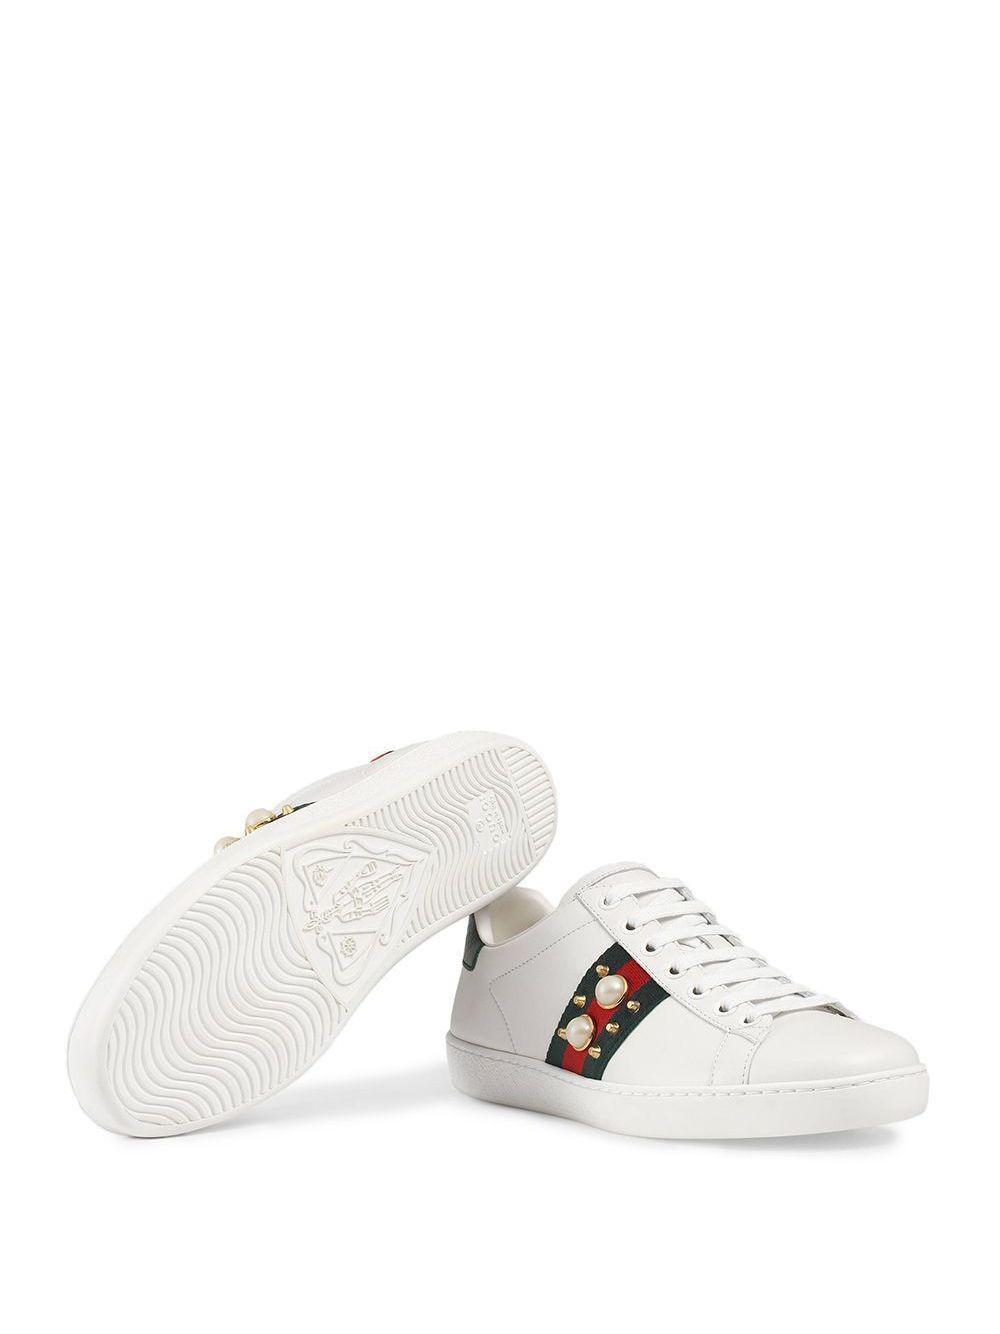 gucci ace sneakers pearl